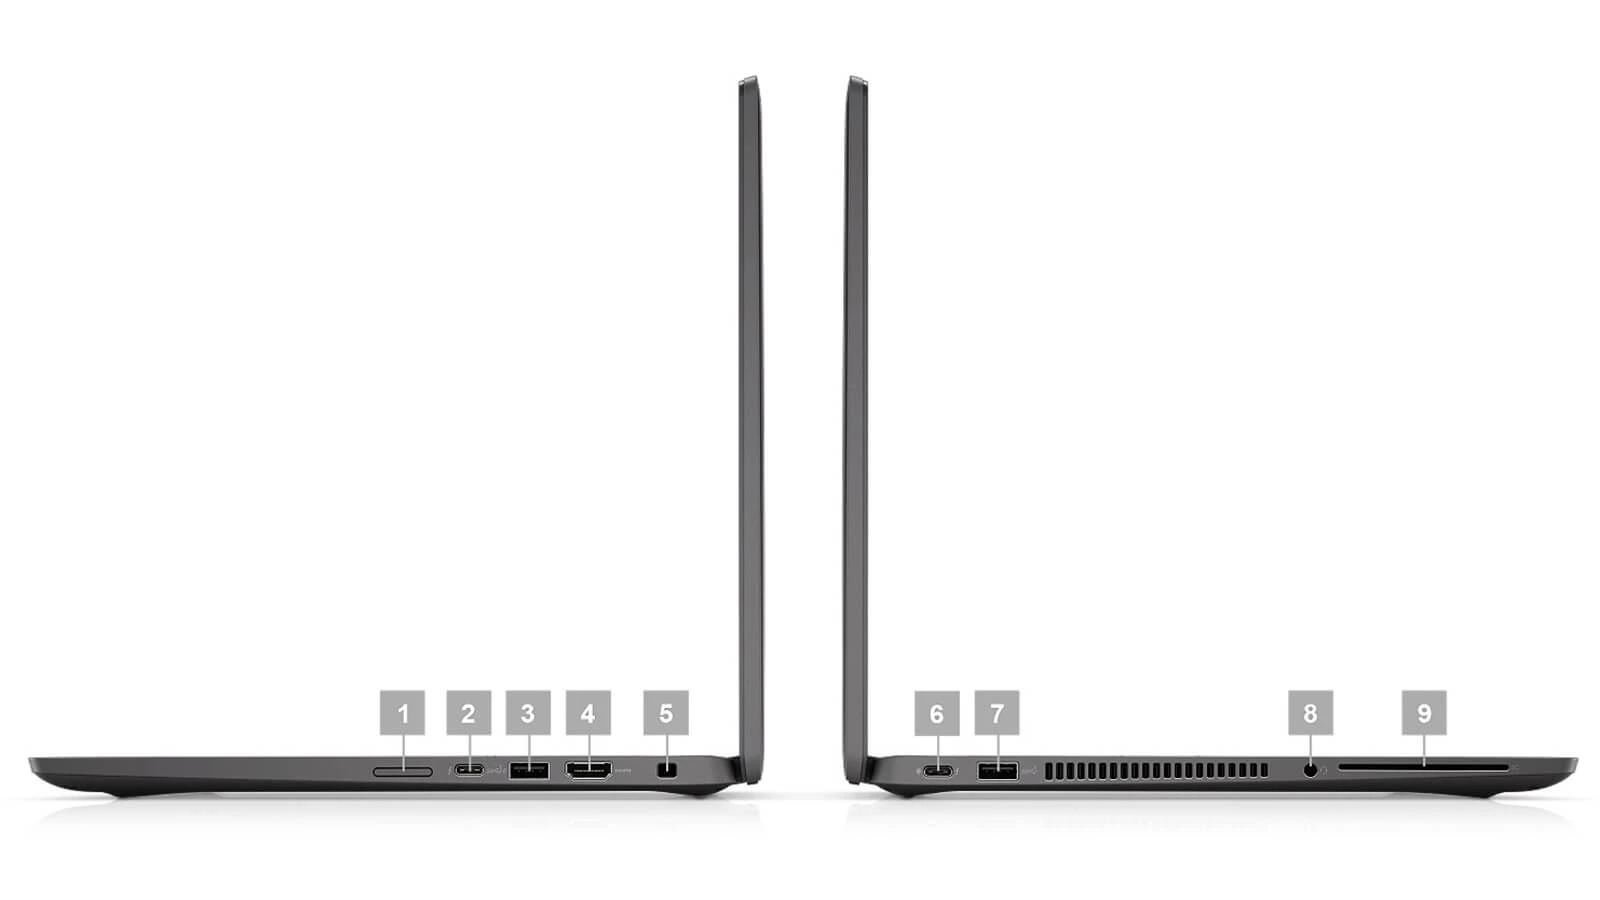 Dell Latitude 7530 (2022) Features 04